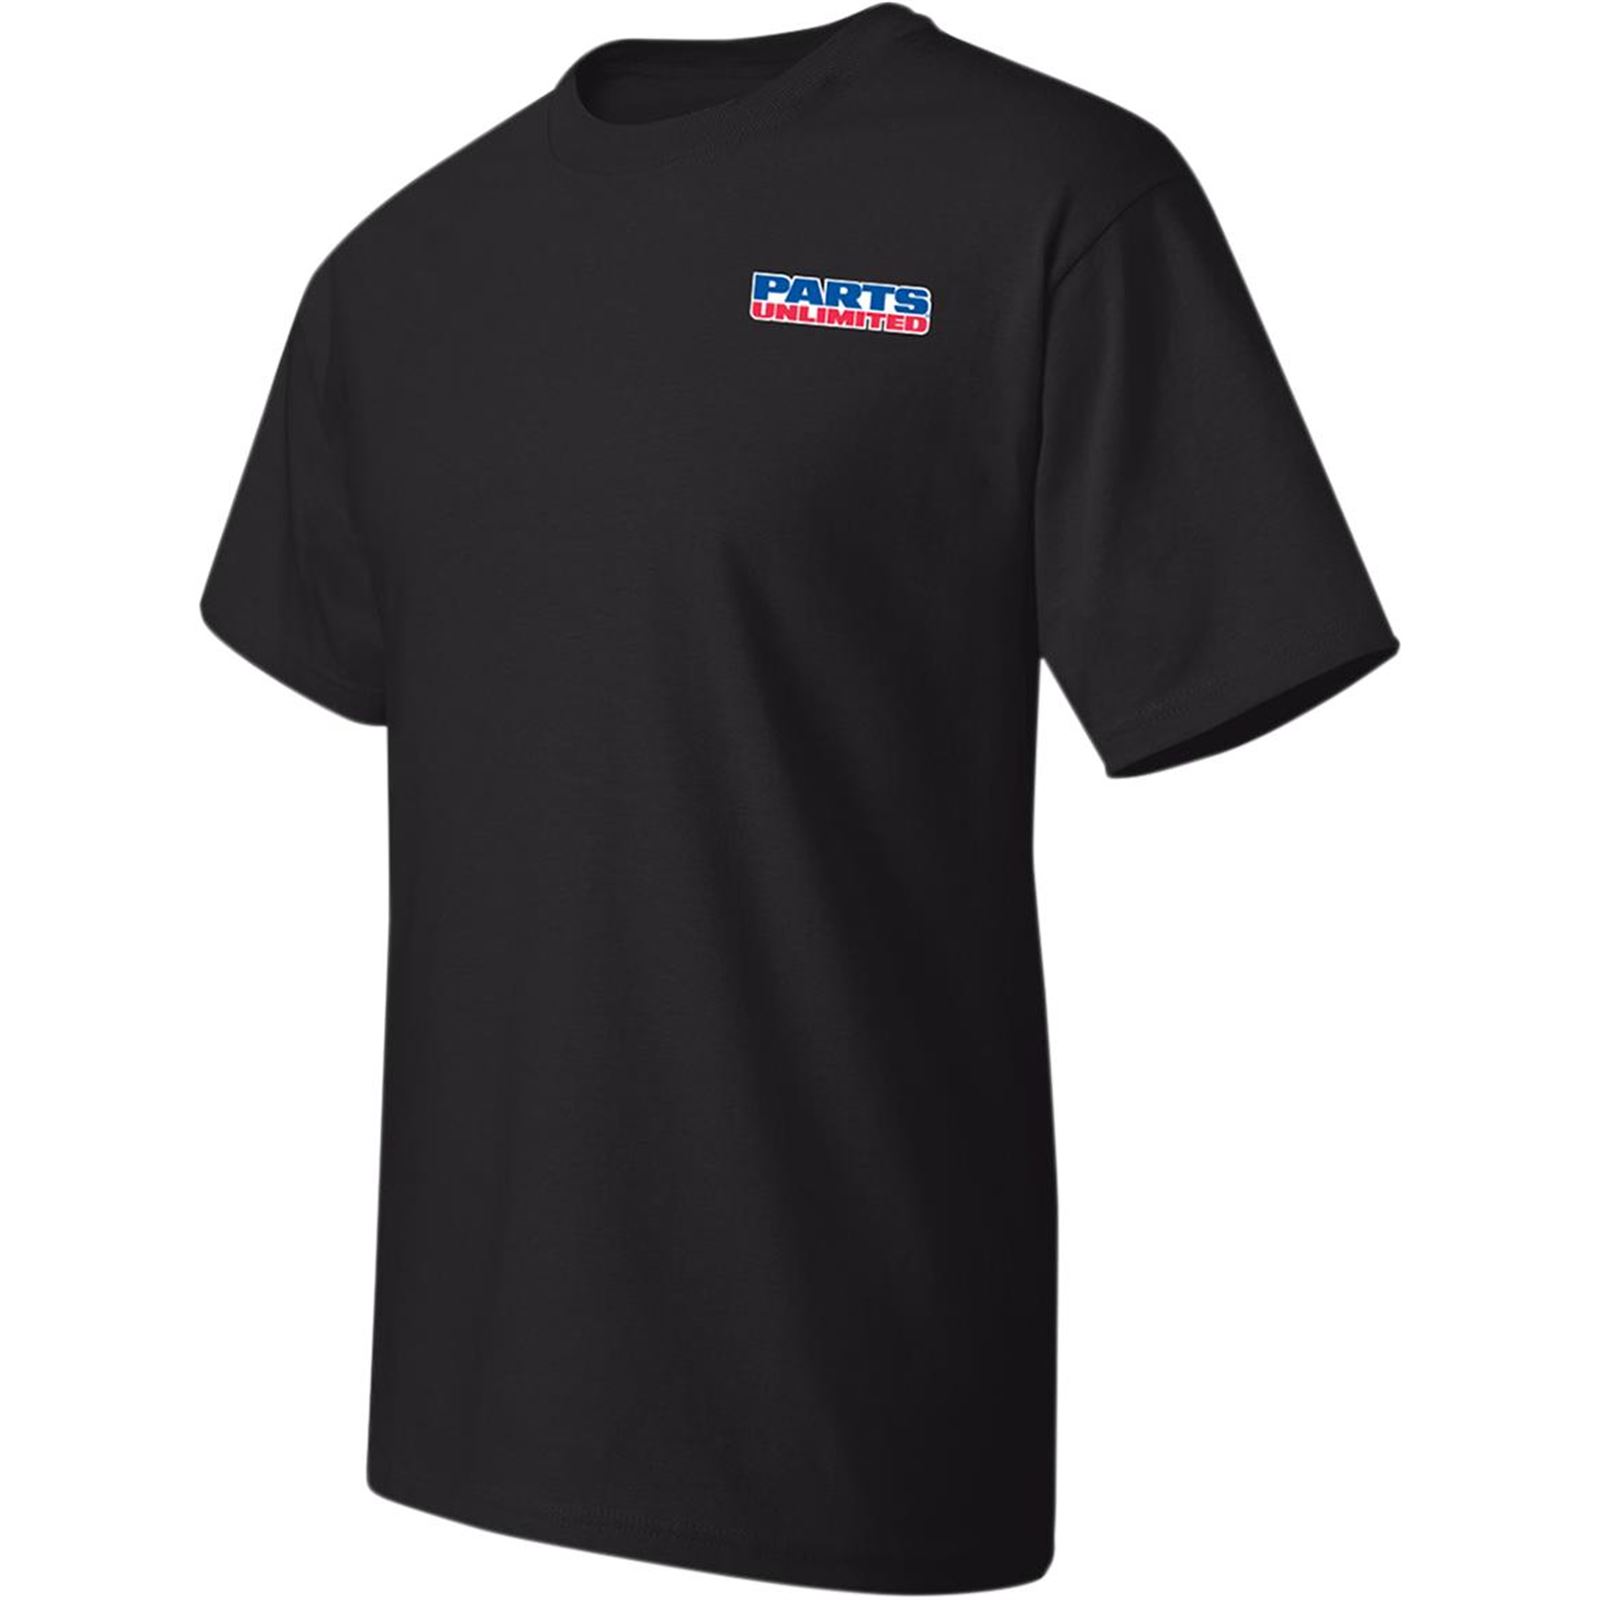 Parts Unlimited Tee Shirt Black - 2X-Large